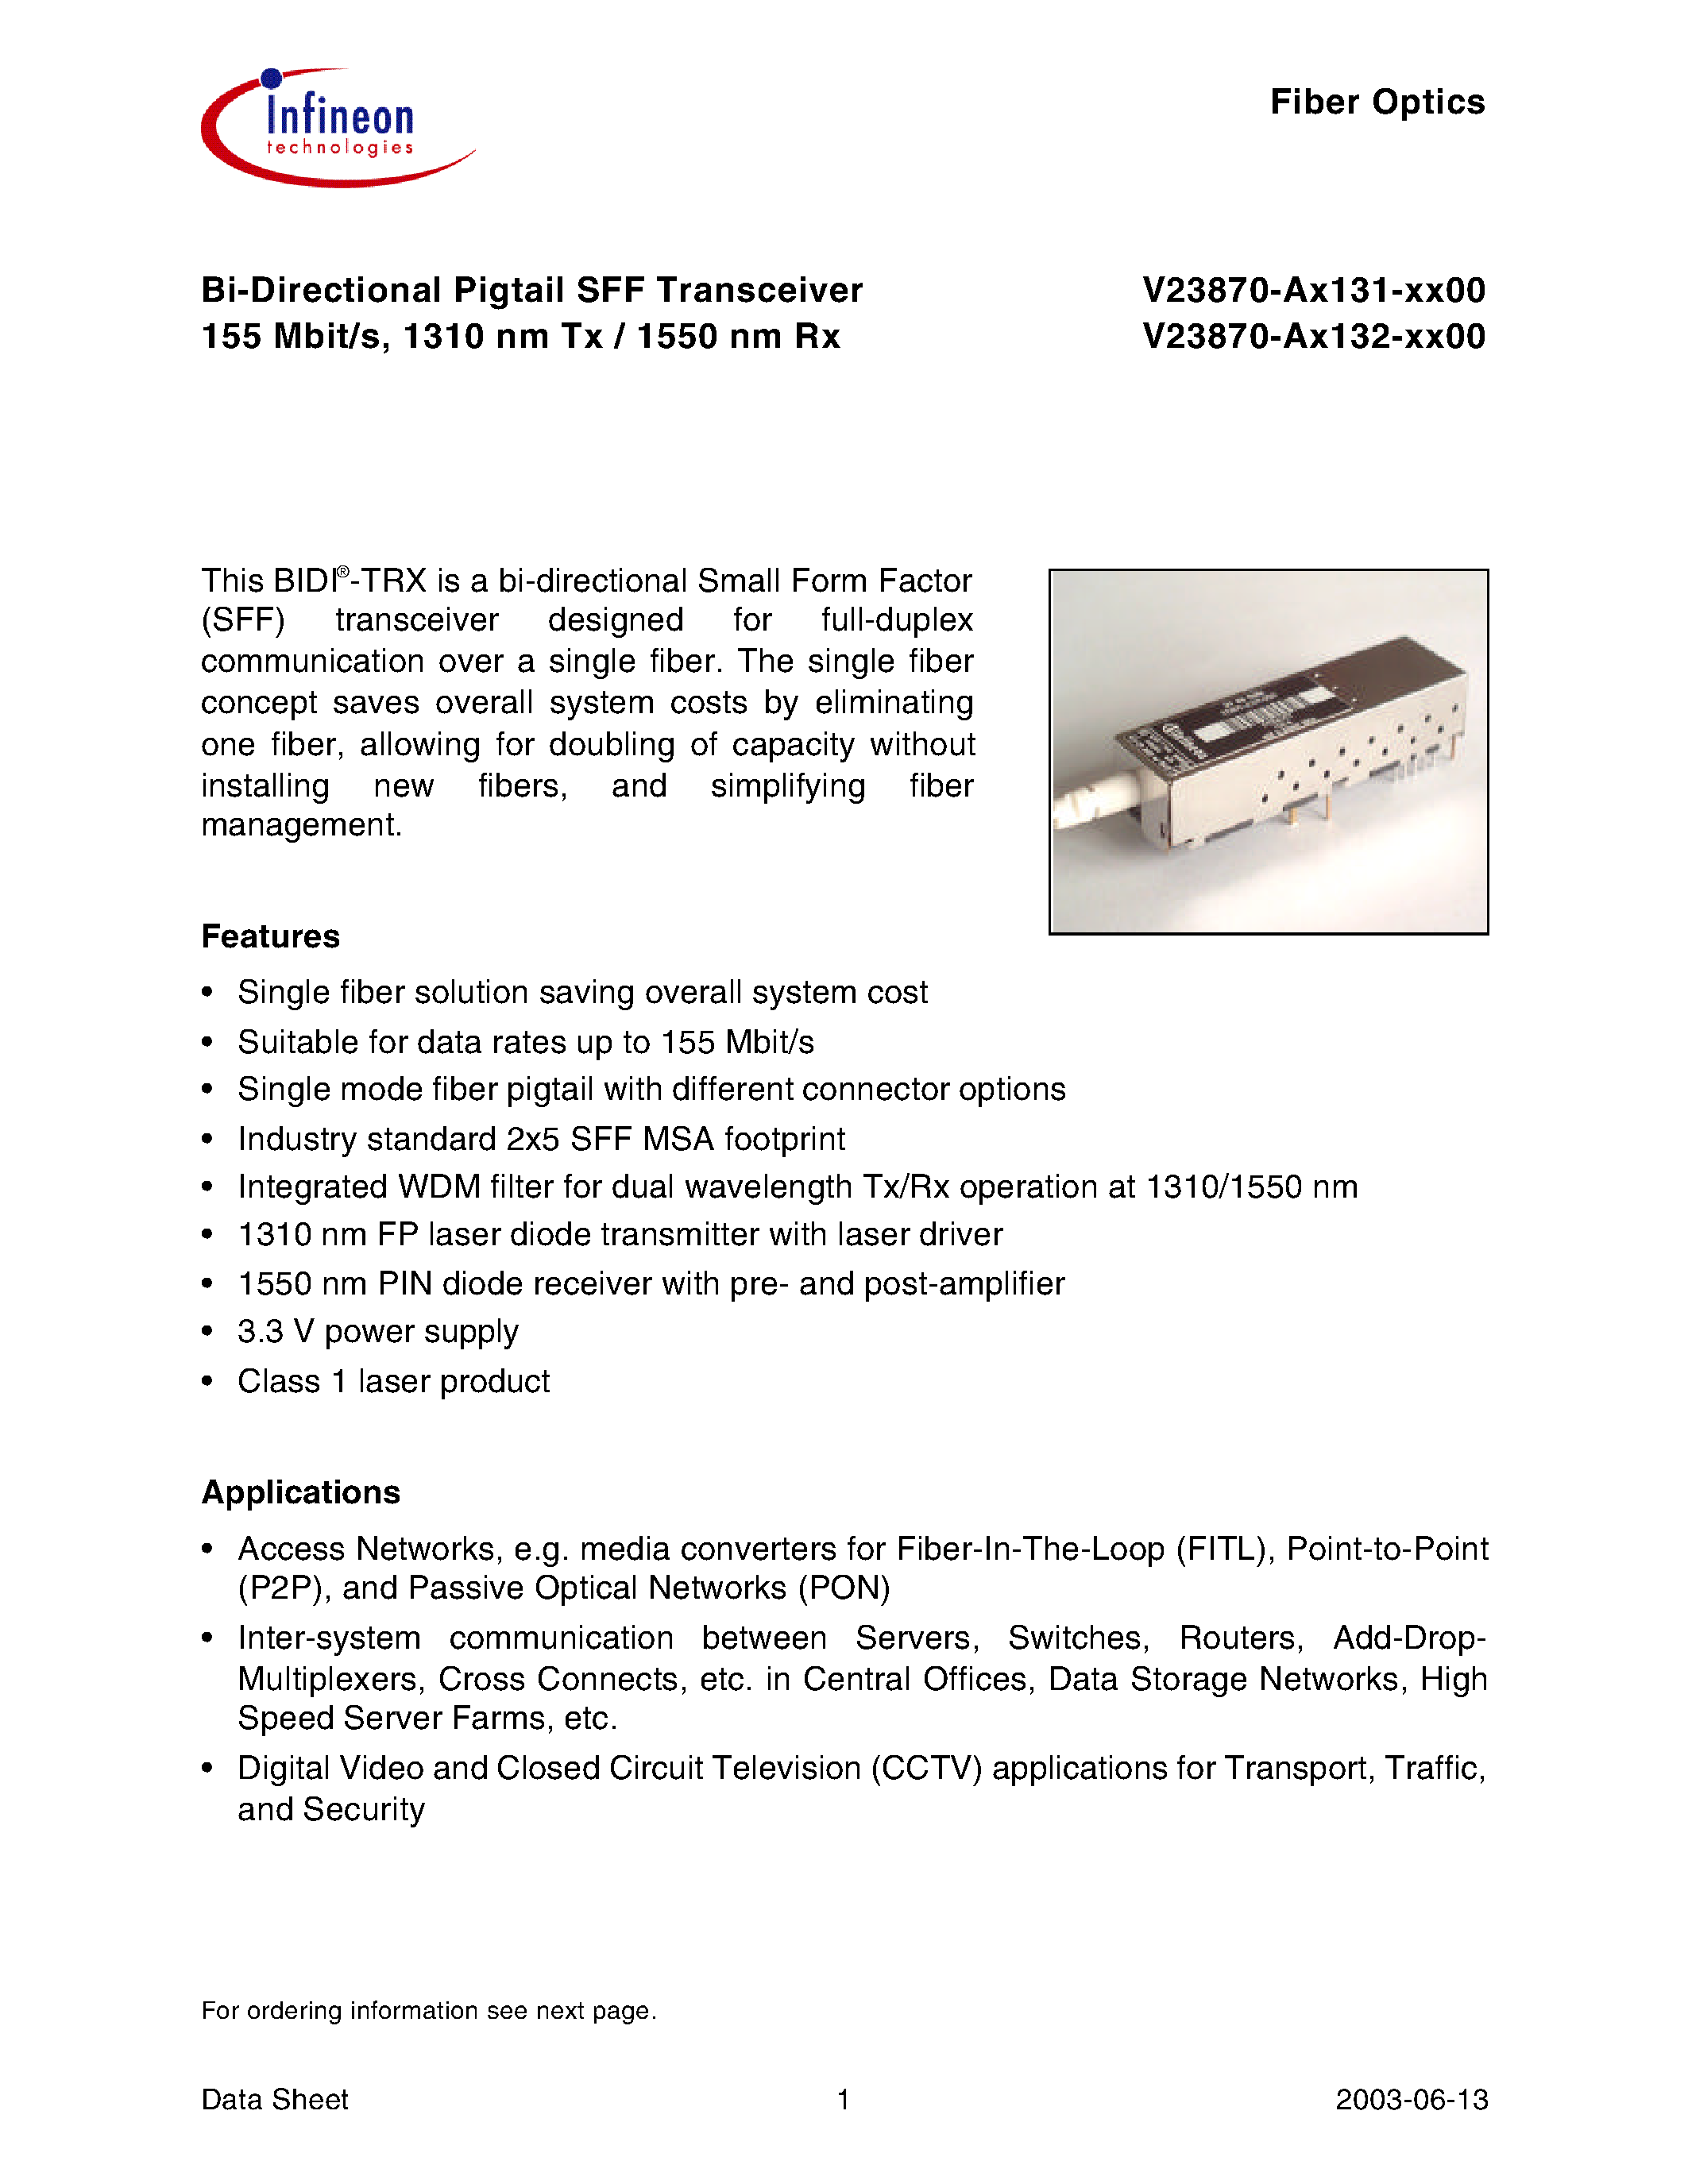 Datasheet V23870-A3131-K500 - Bi-Directional Pigtail SFF Transceiver 155 Mbit/s/ 1310 nm Tx / 1550 nm Rx page 1